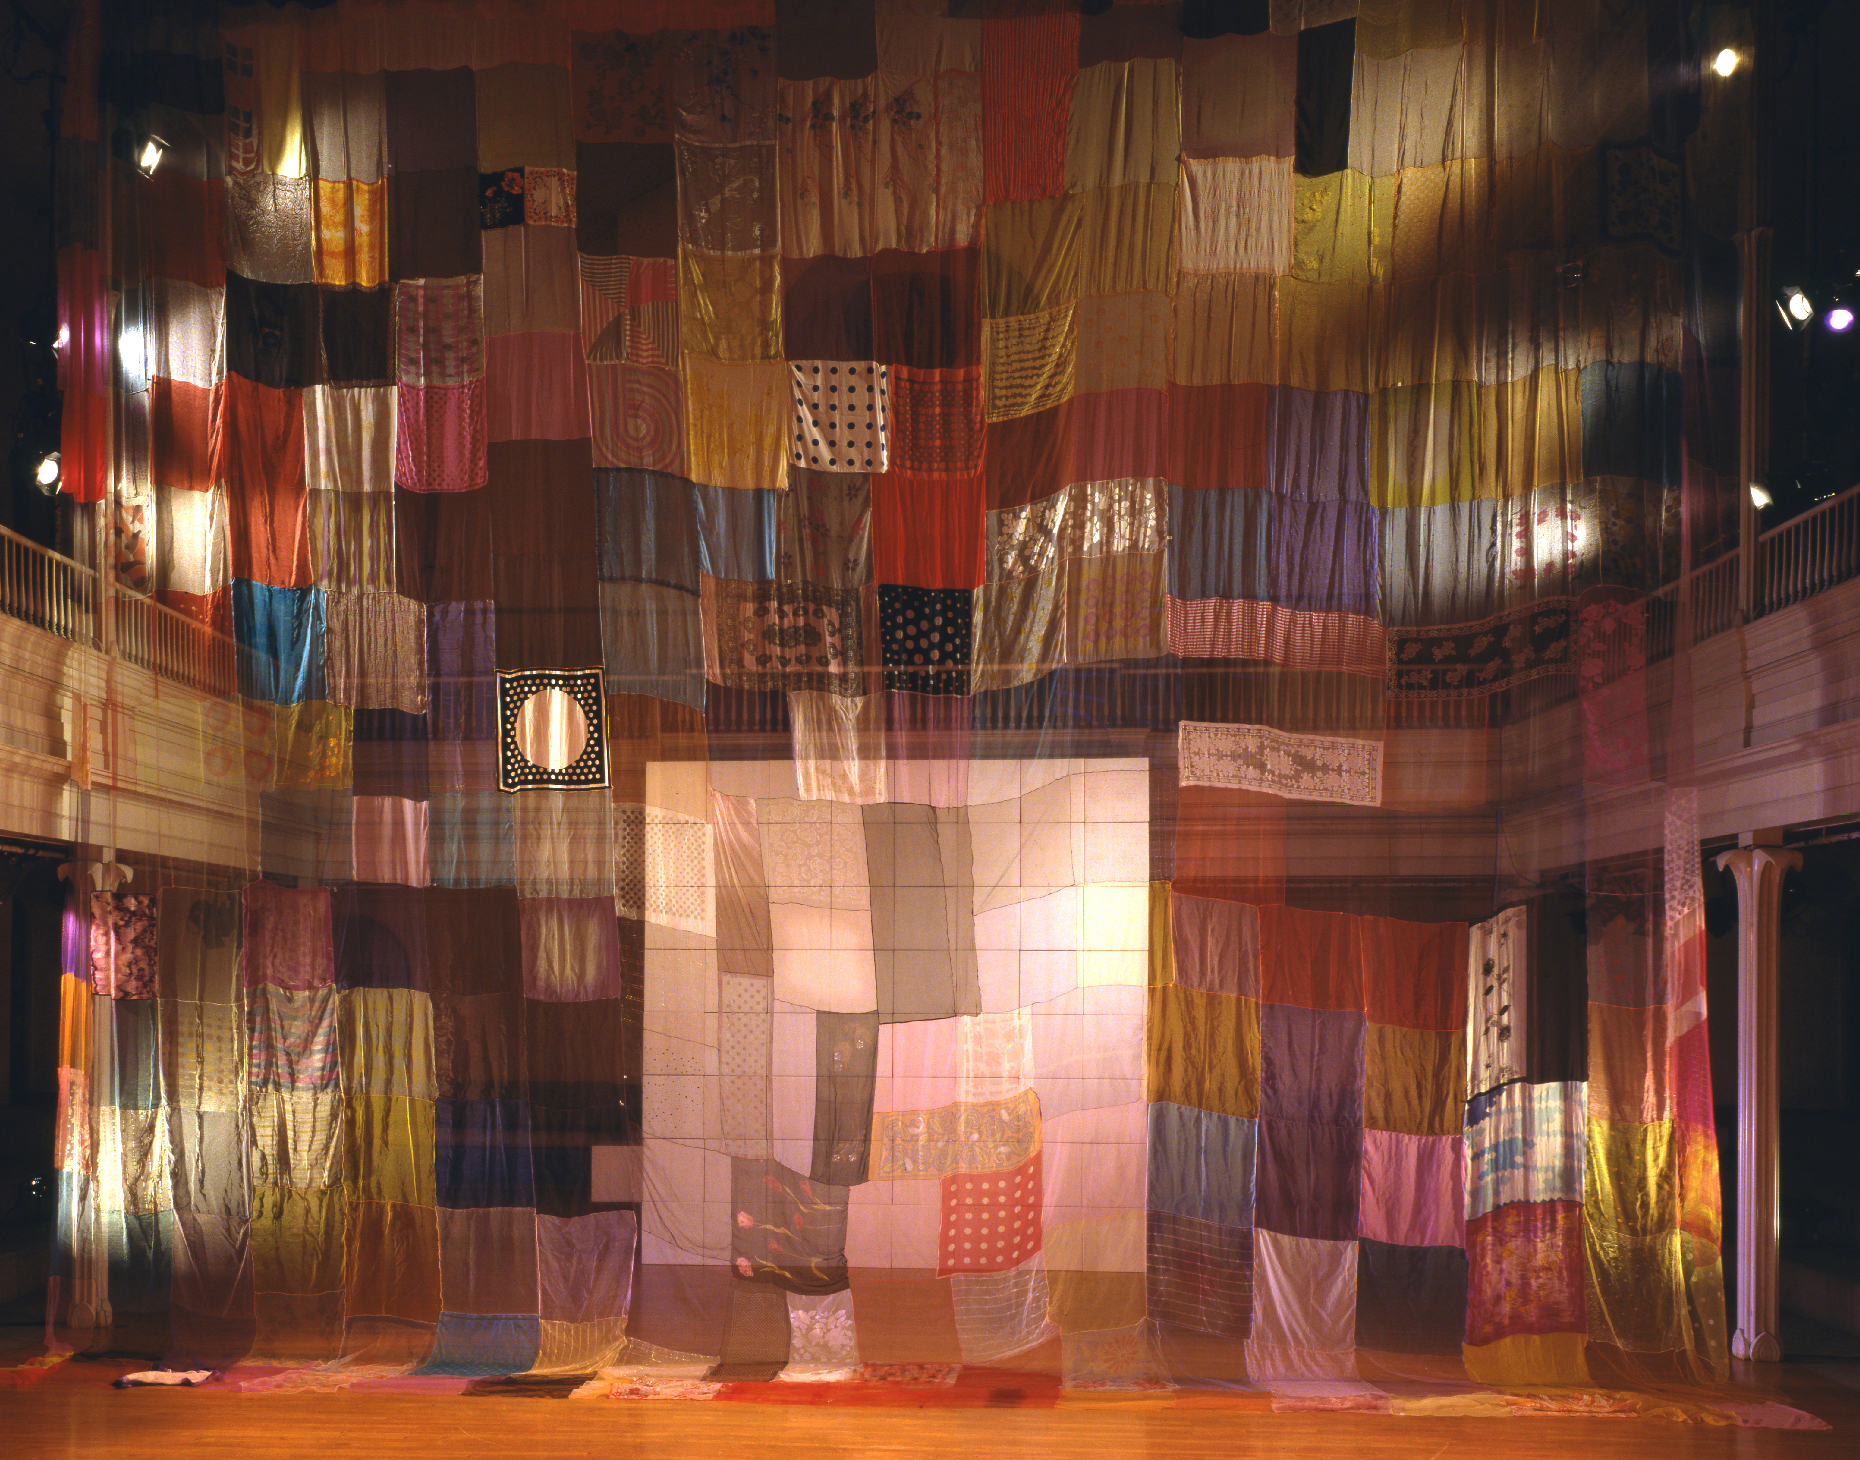 Stage set for “Tell Me The Truth About Love” in Collaboration with Tom Bogdan and Terry Creach, installation view at St. Mark’s Church, New York, 2000. Artwork © Jim Hodges 